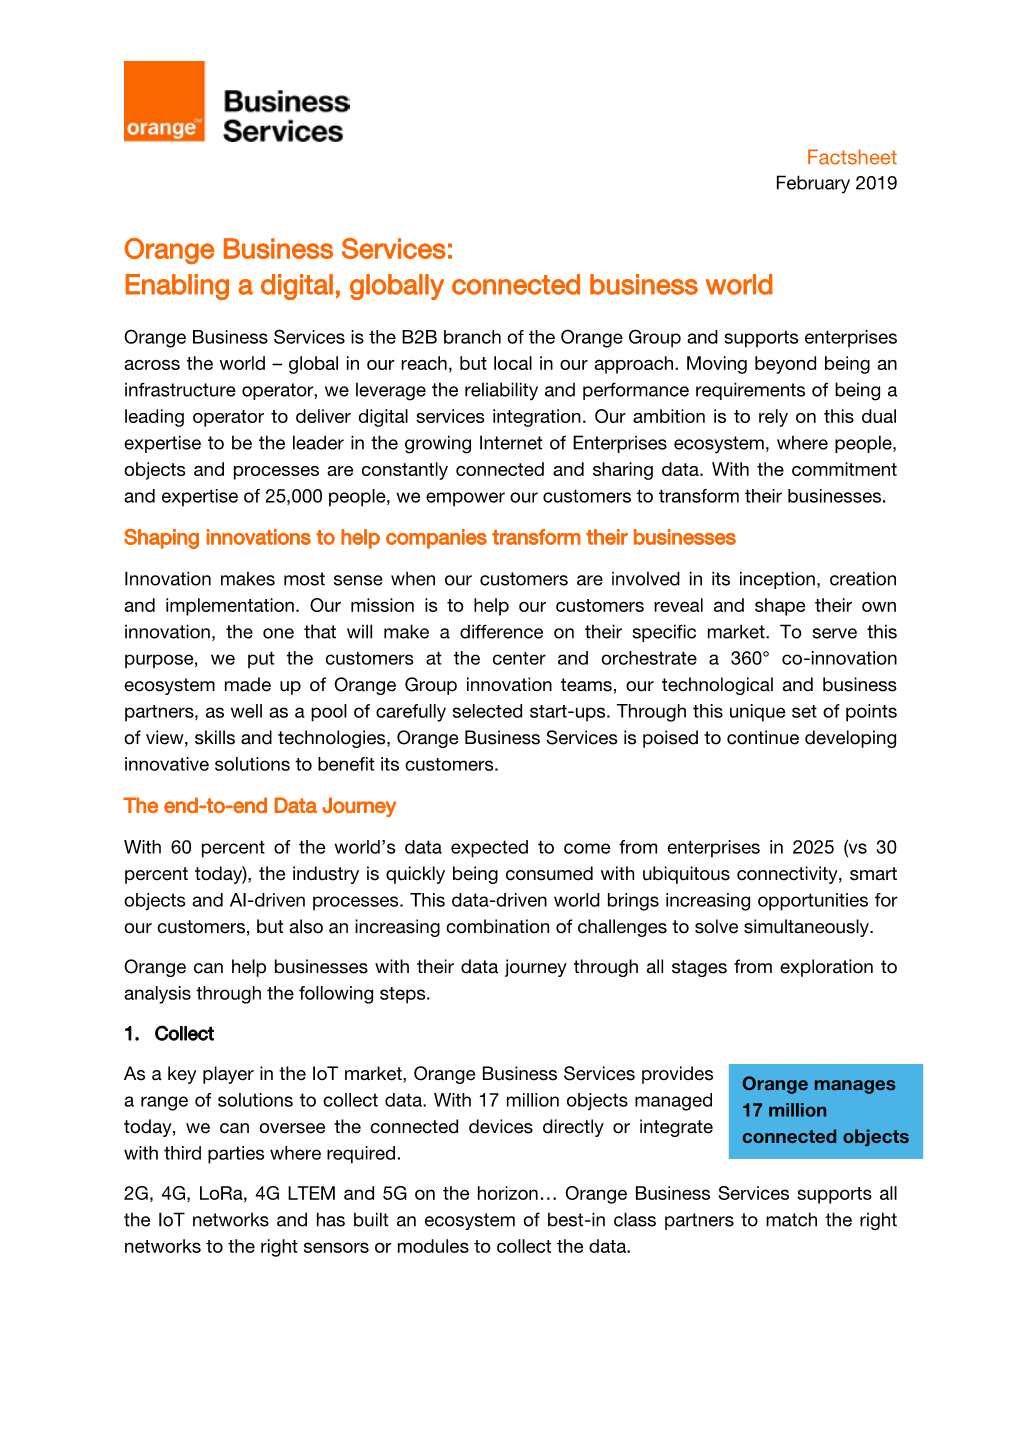 Orange Business Services: Enabling a Digital, Globally Connected Business World